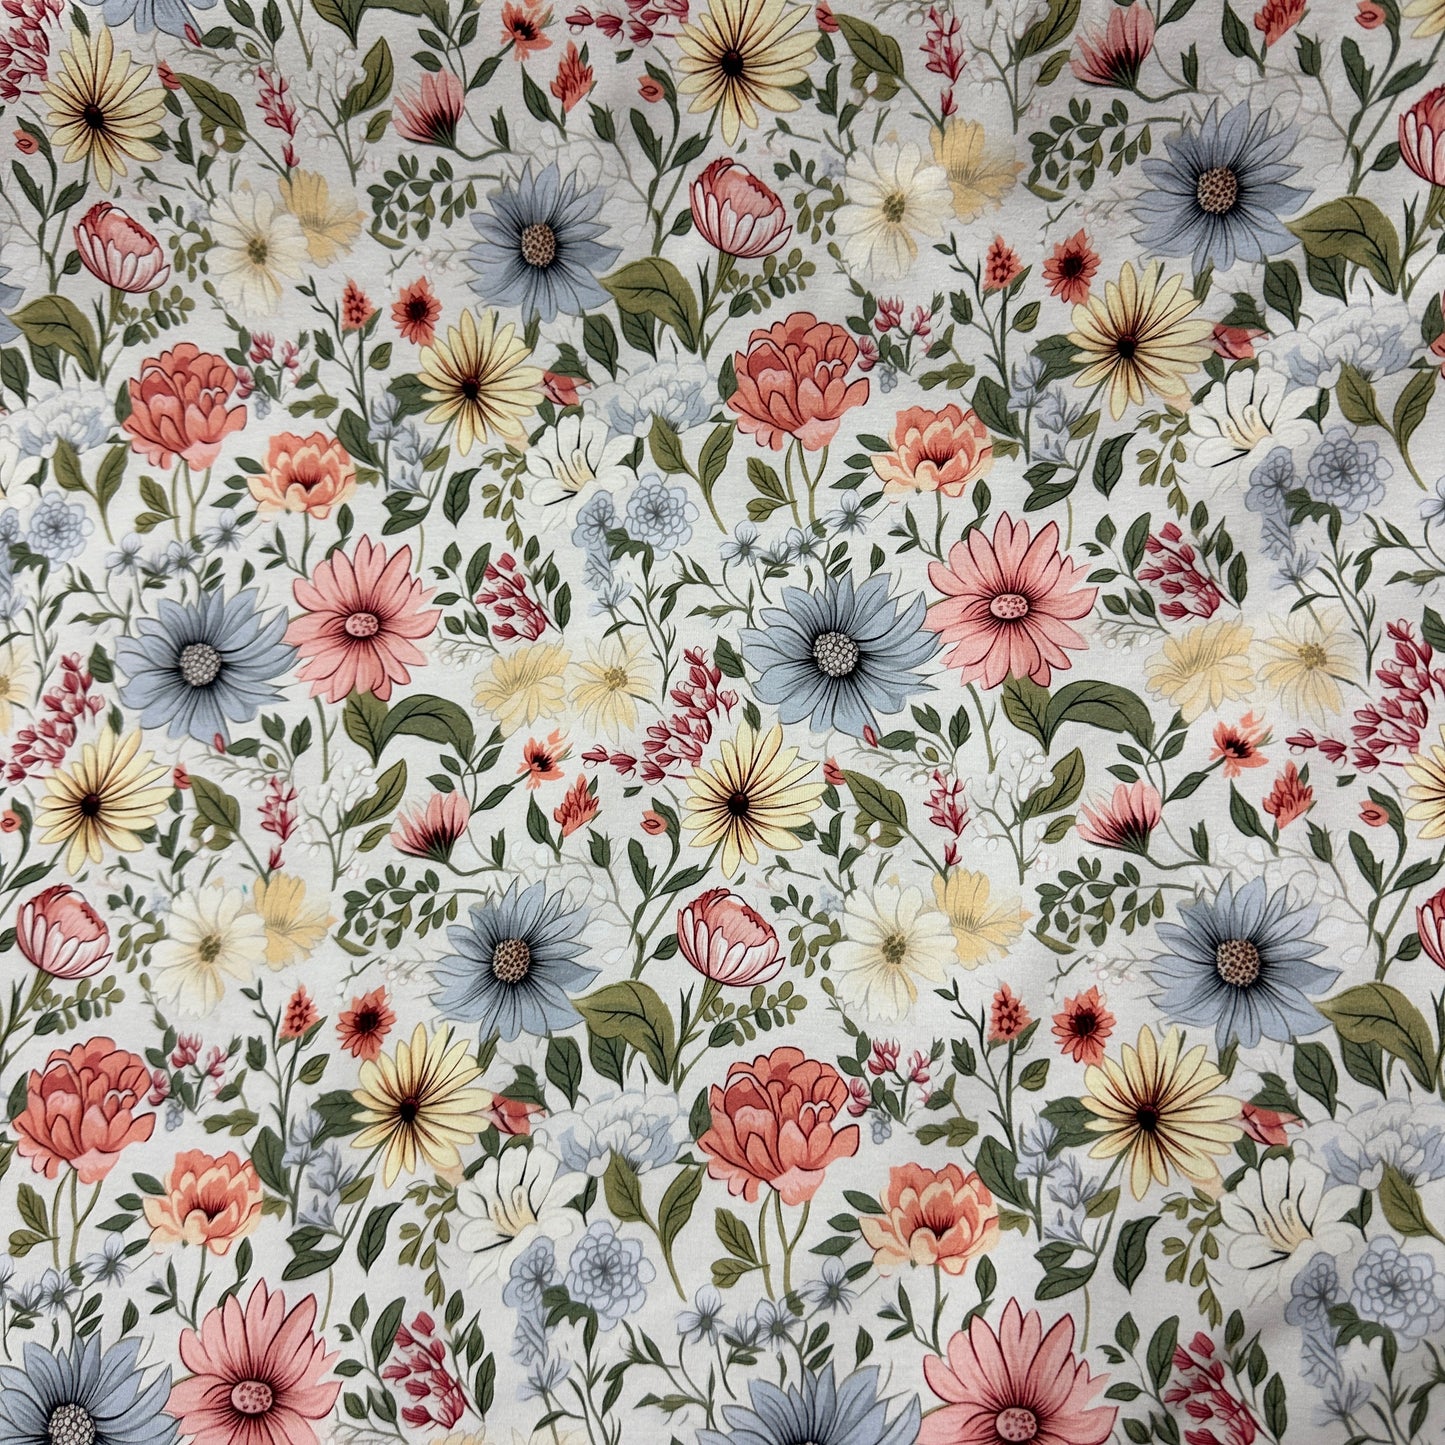 Pink and Blue Daisies on Organic Cotton/Spandex Jersey Fabric